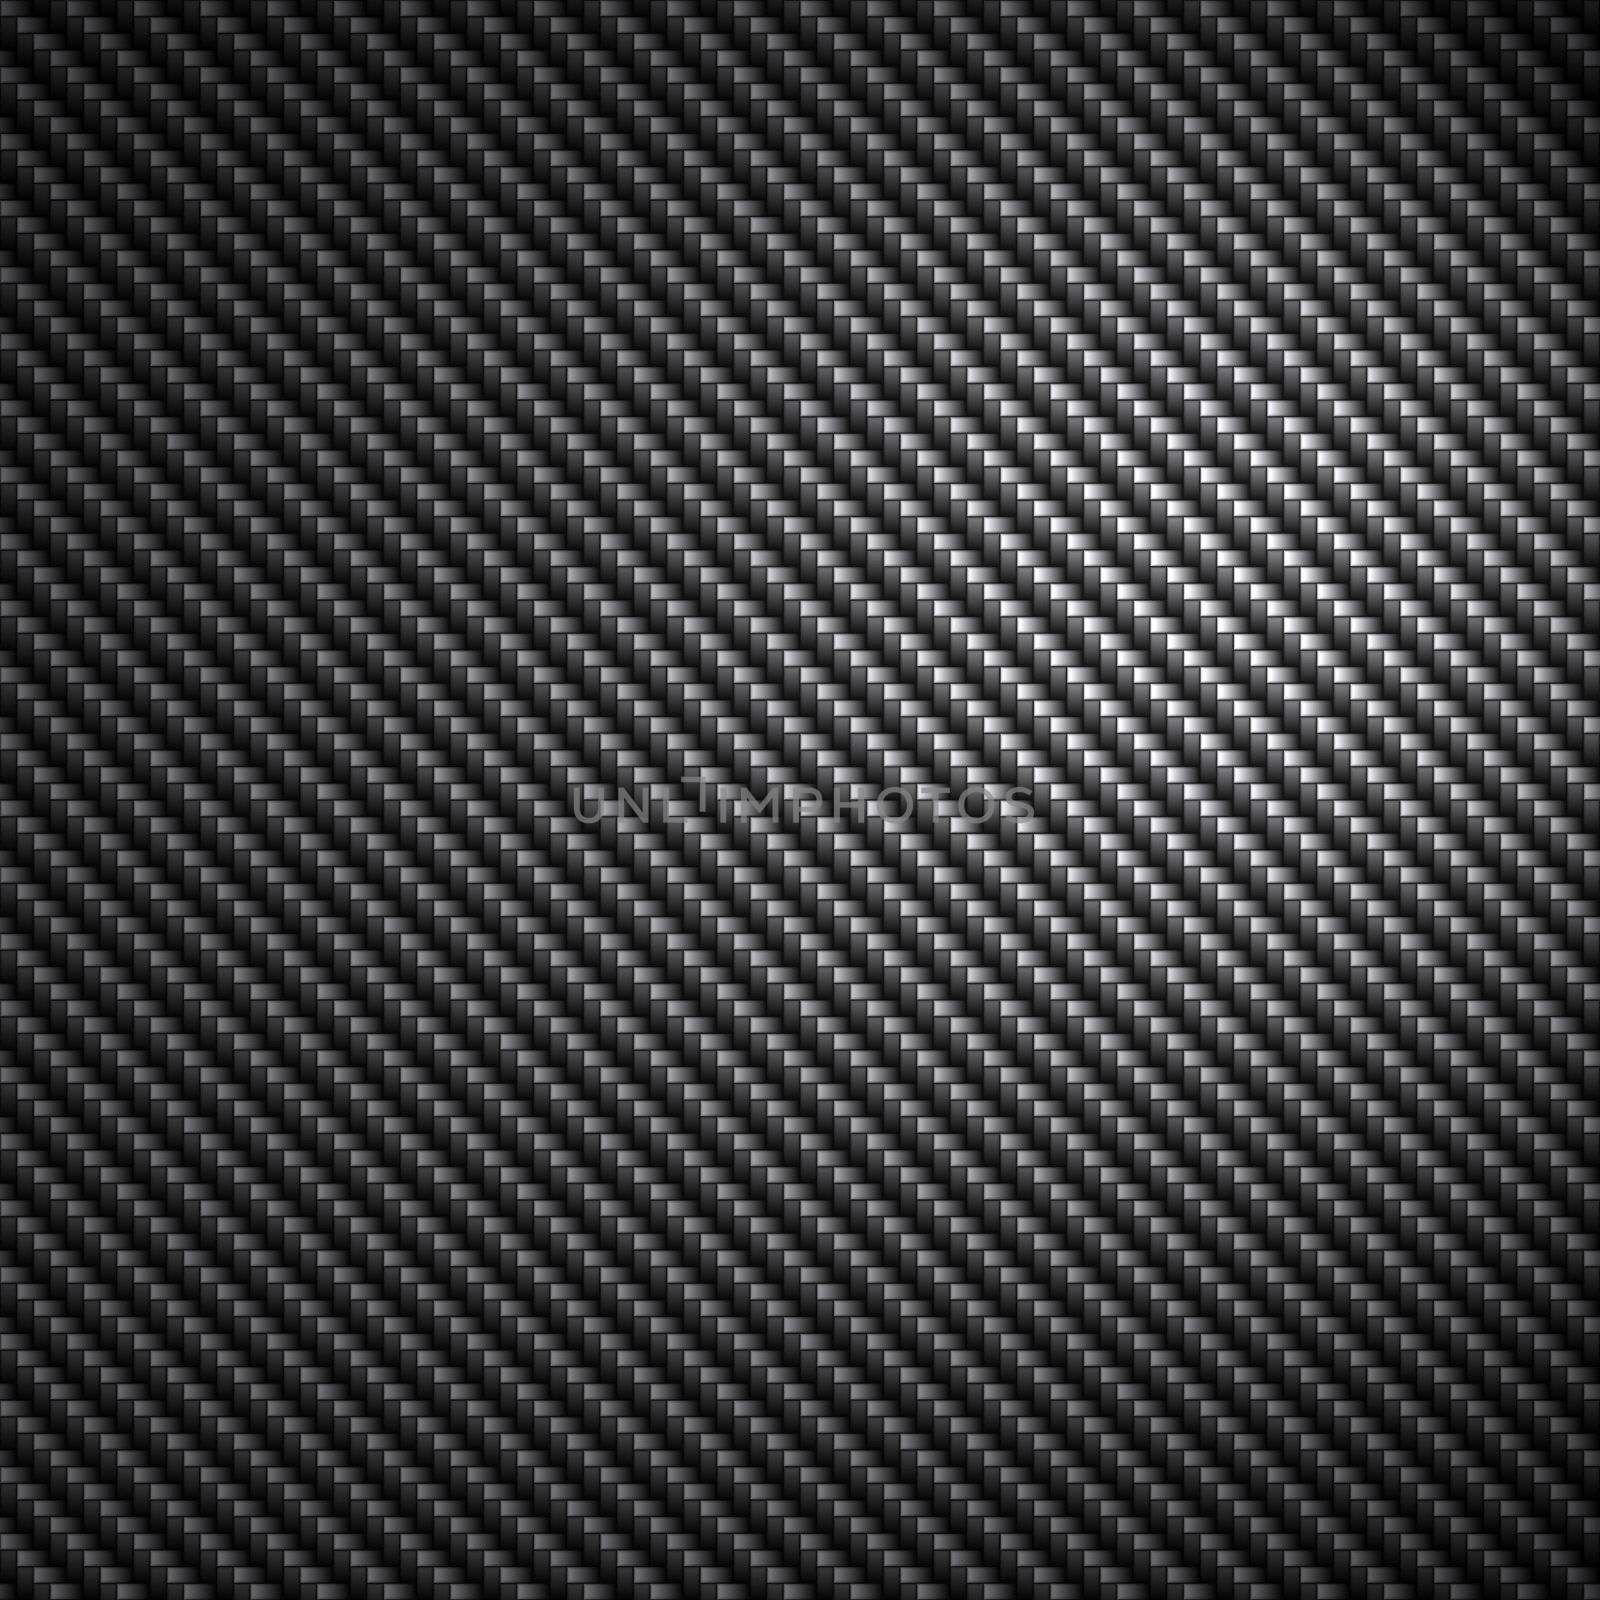 Black Carbon Fiber Texture by graficallyminded